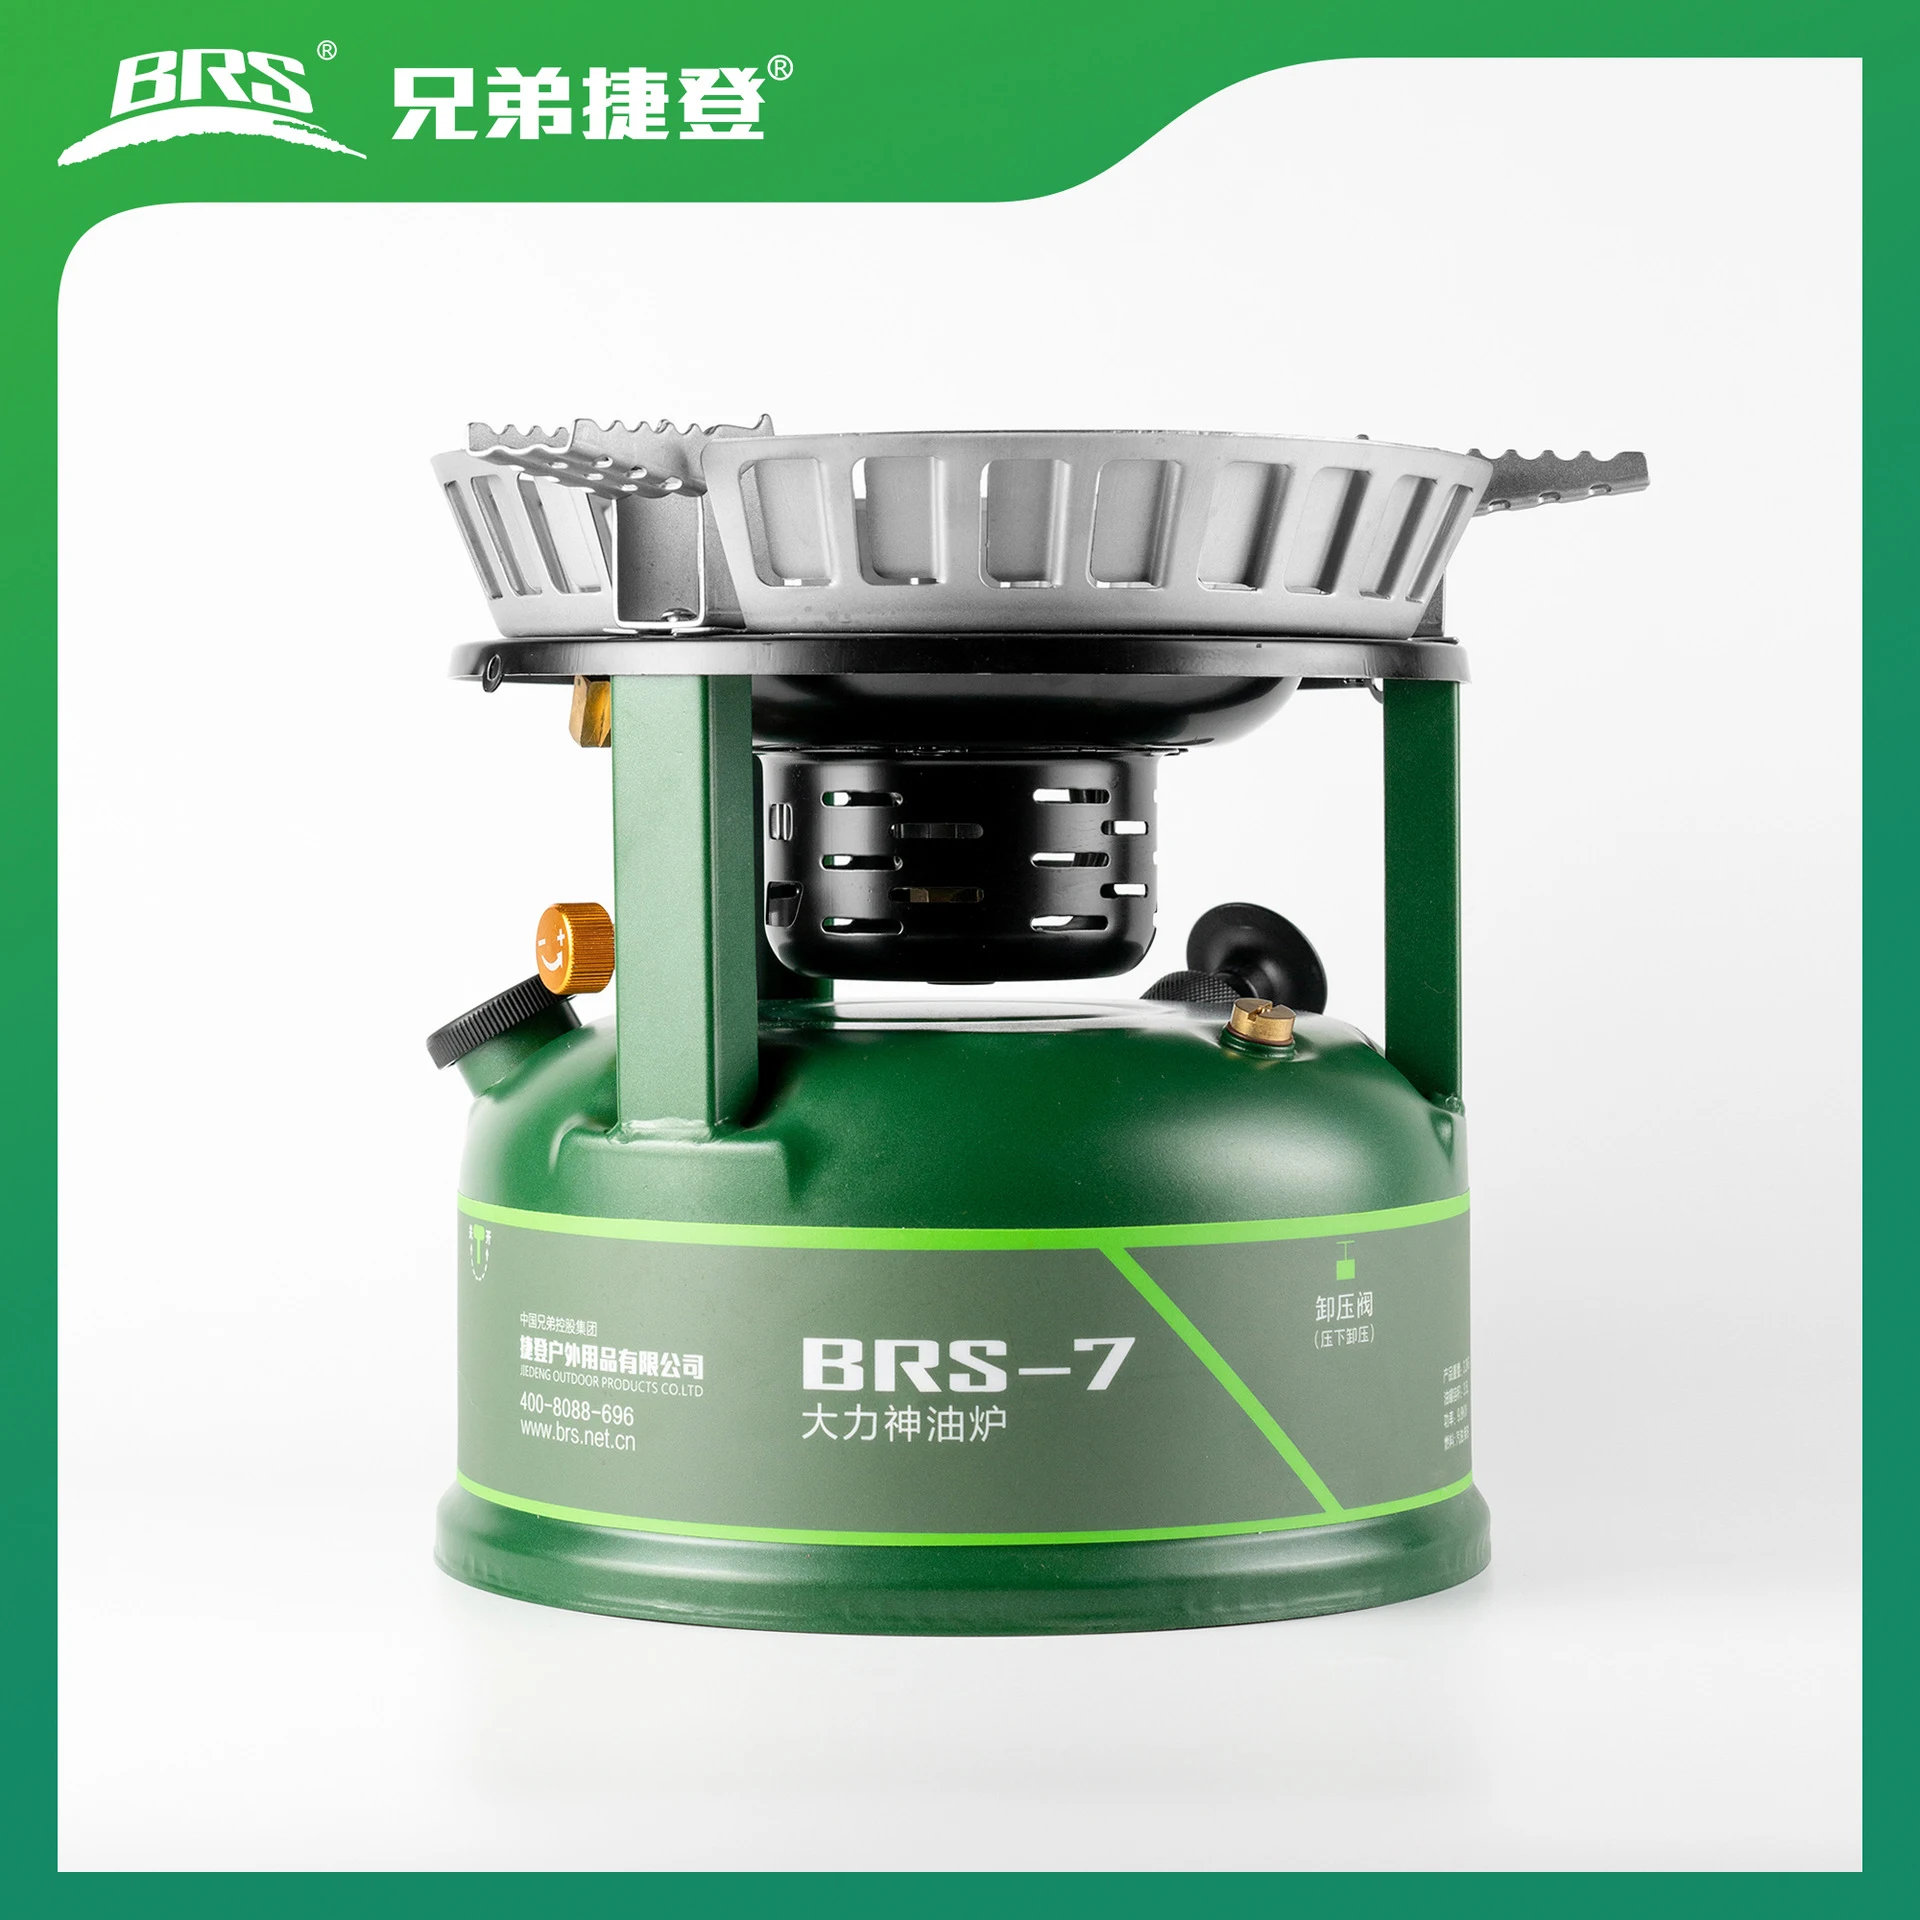 

BRS 9800W Powerful Outdoor Camping Auto Travel Stove Family Outdoor Stove Gasoline Diesel Kerosene Stove BRS-7